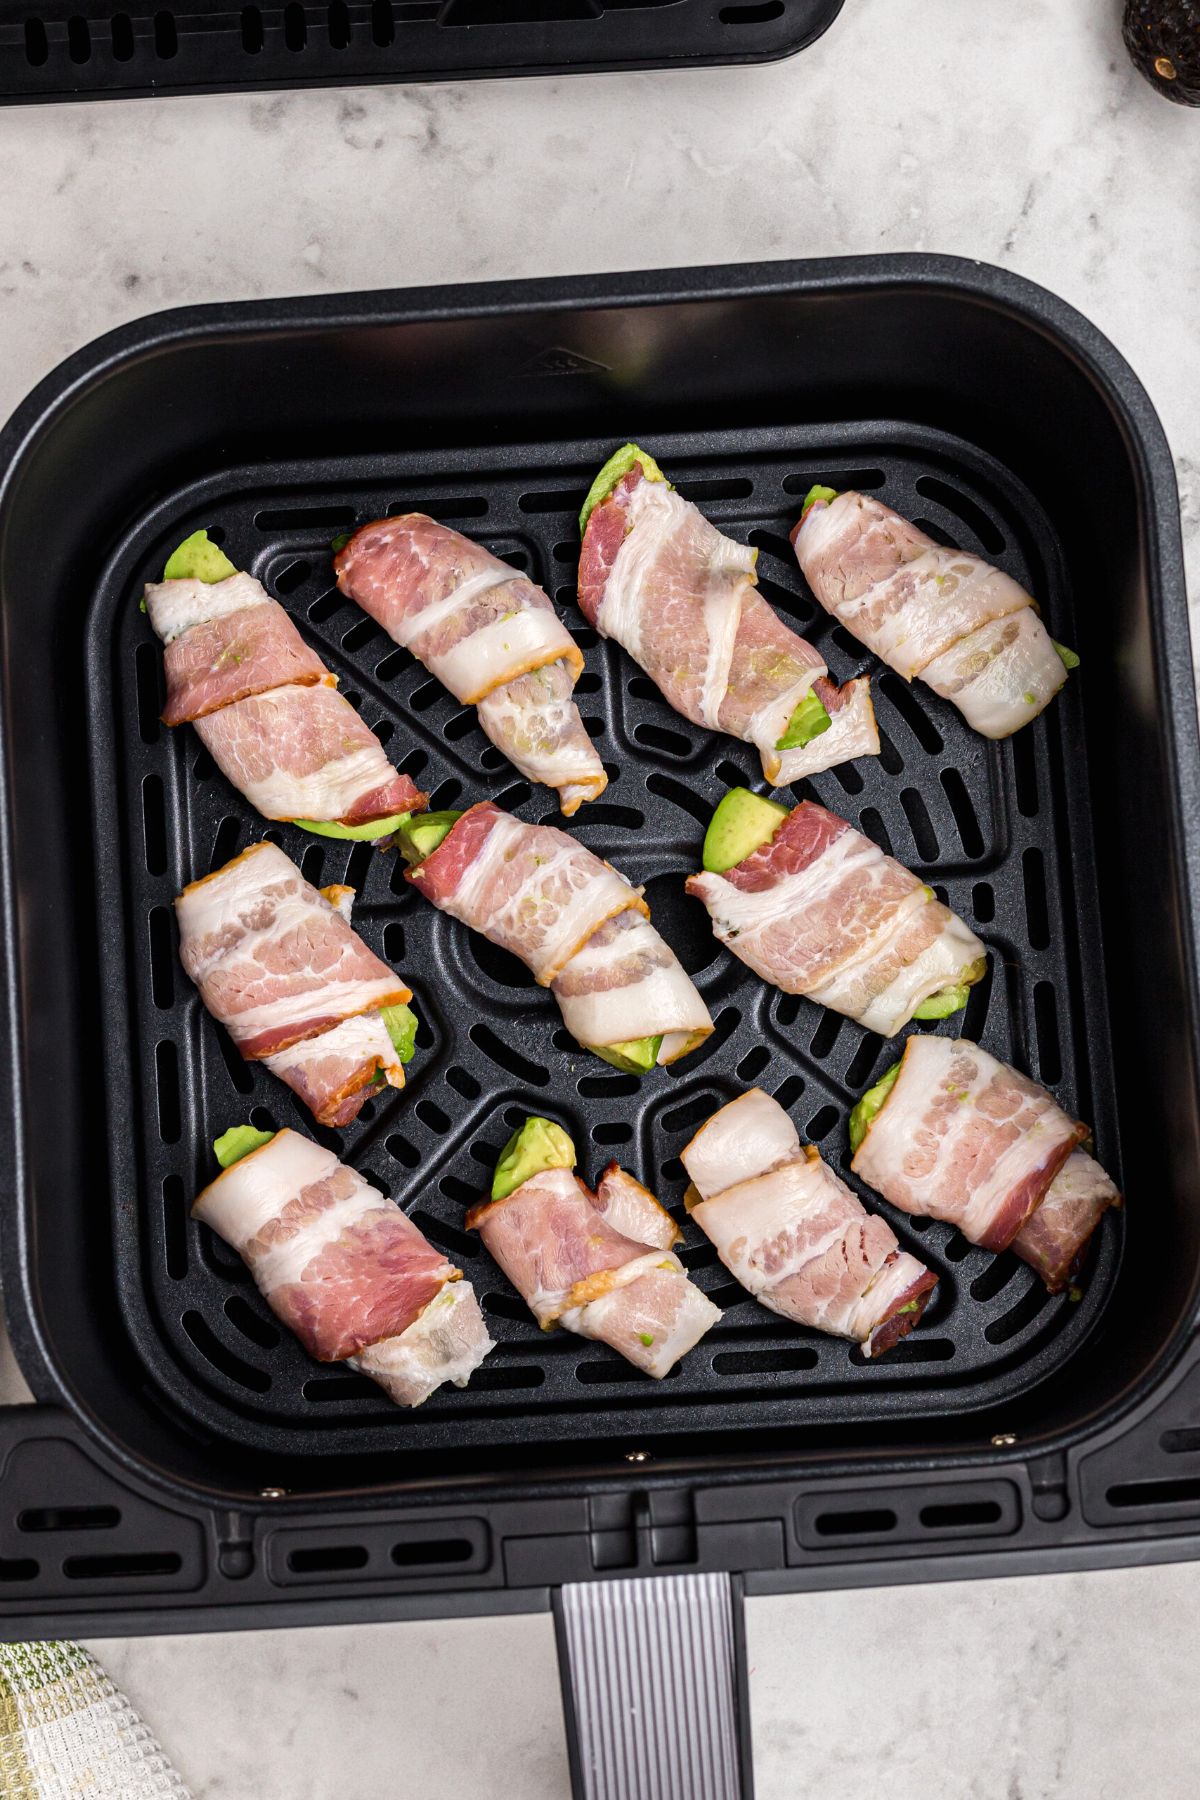 Uncooked bacon slices wrapped around avocado wedges.